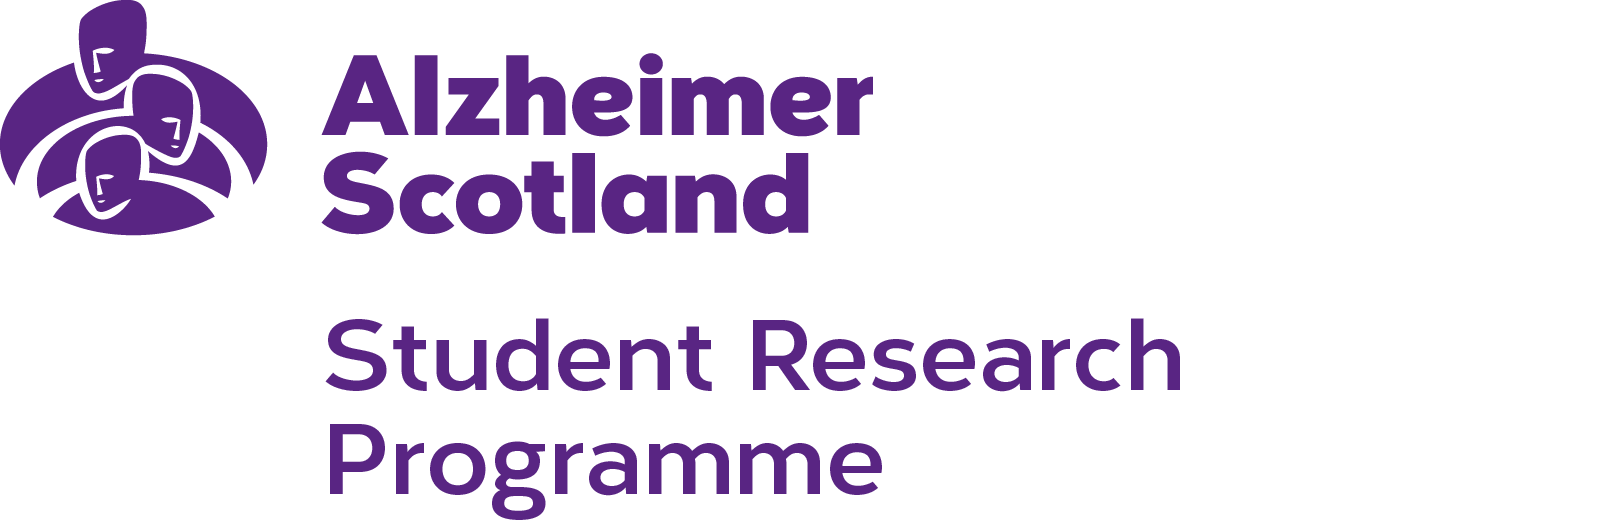 Funding Opportunity: Alzheimer Scotland Student Research Programme